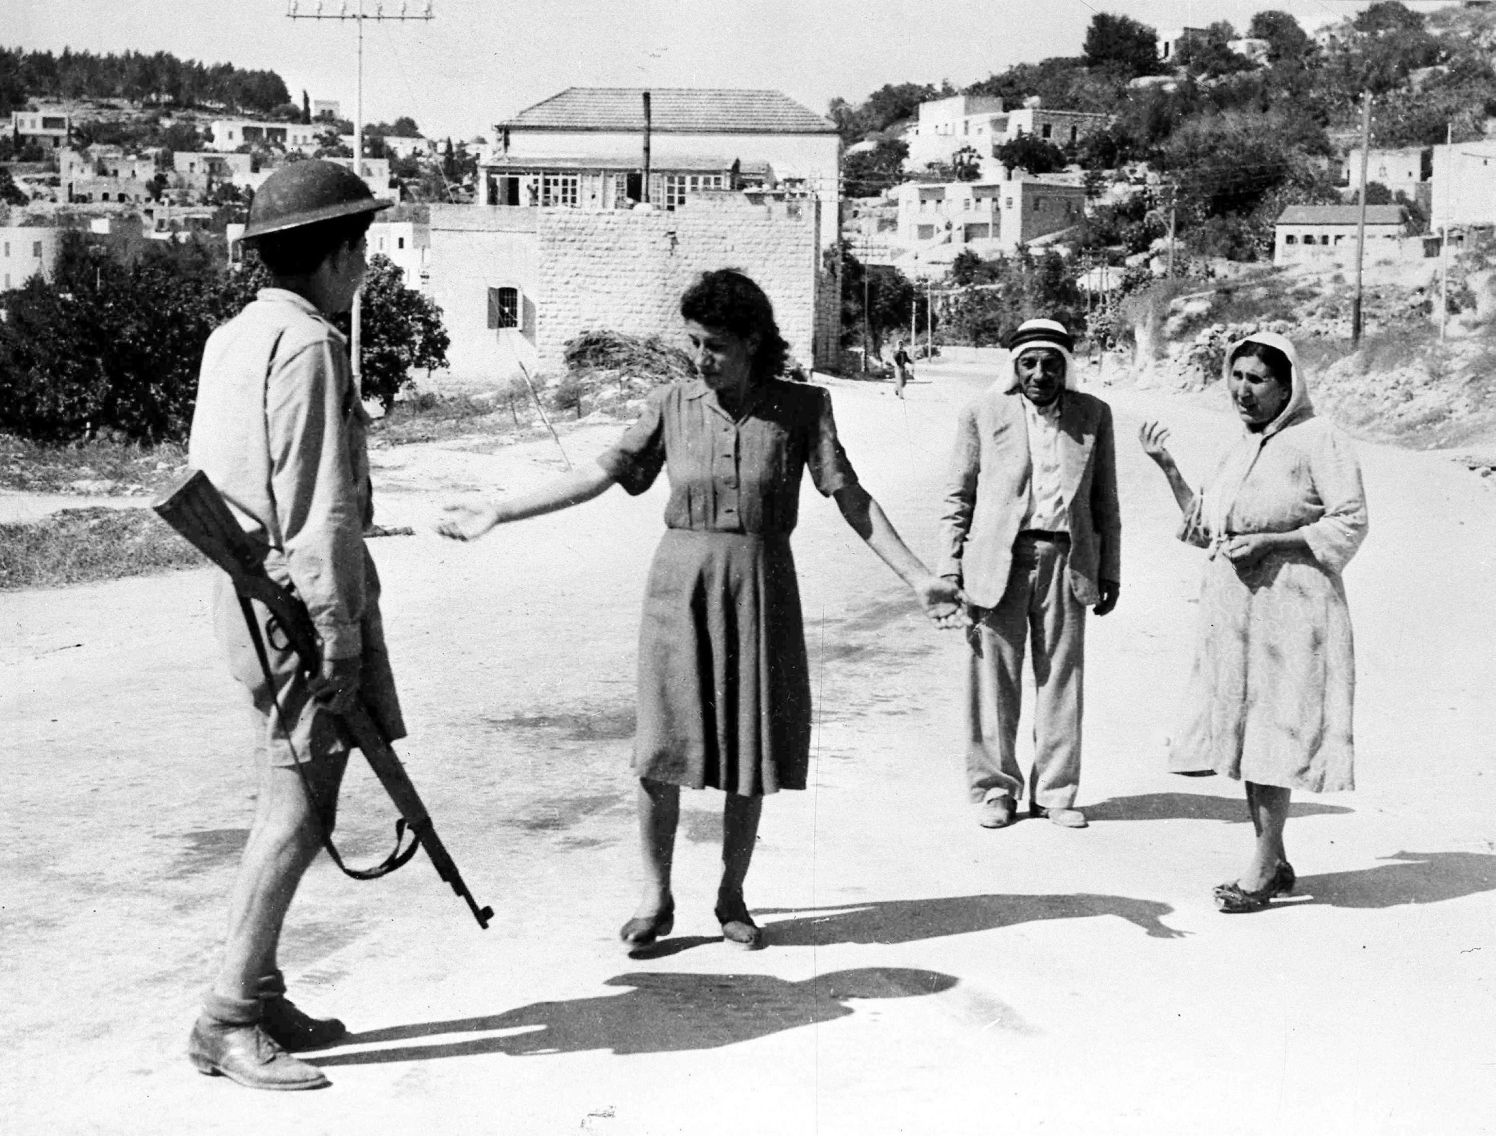 An Israeli soldier, armed with a rifle, stop some arabs in a street in Nazareth, Palestine, July 17, 1948, as they are travelling after the allotted curfew time. Israeli forces had occupied the town earlier that day. (AP Photo)